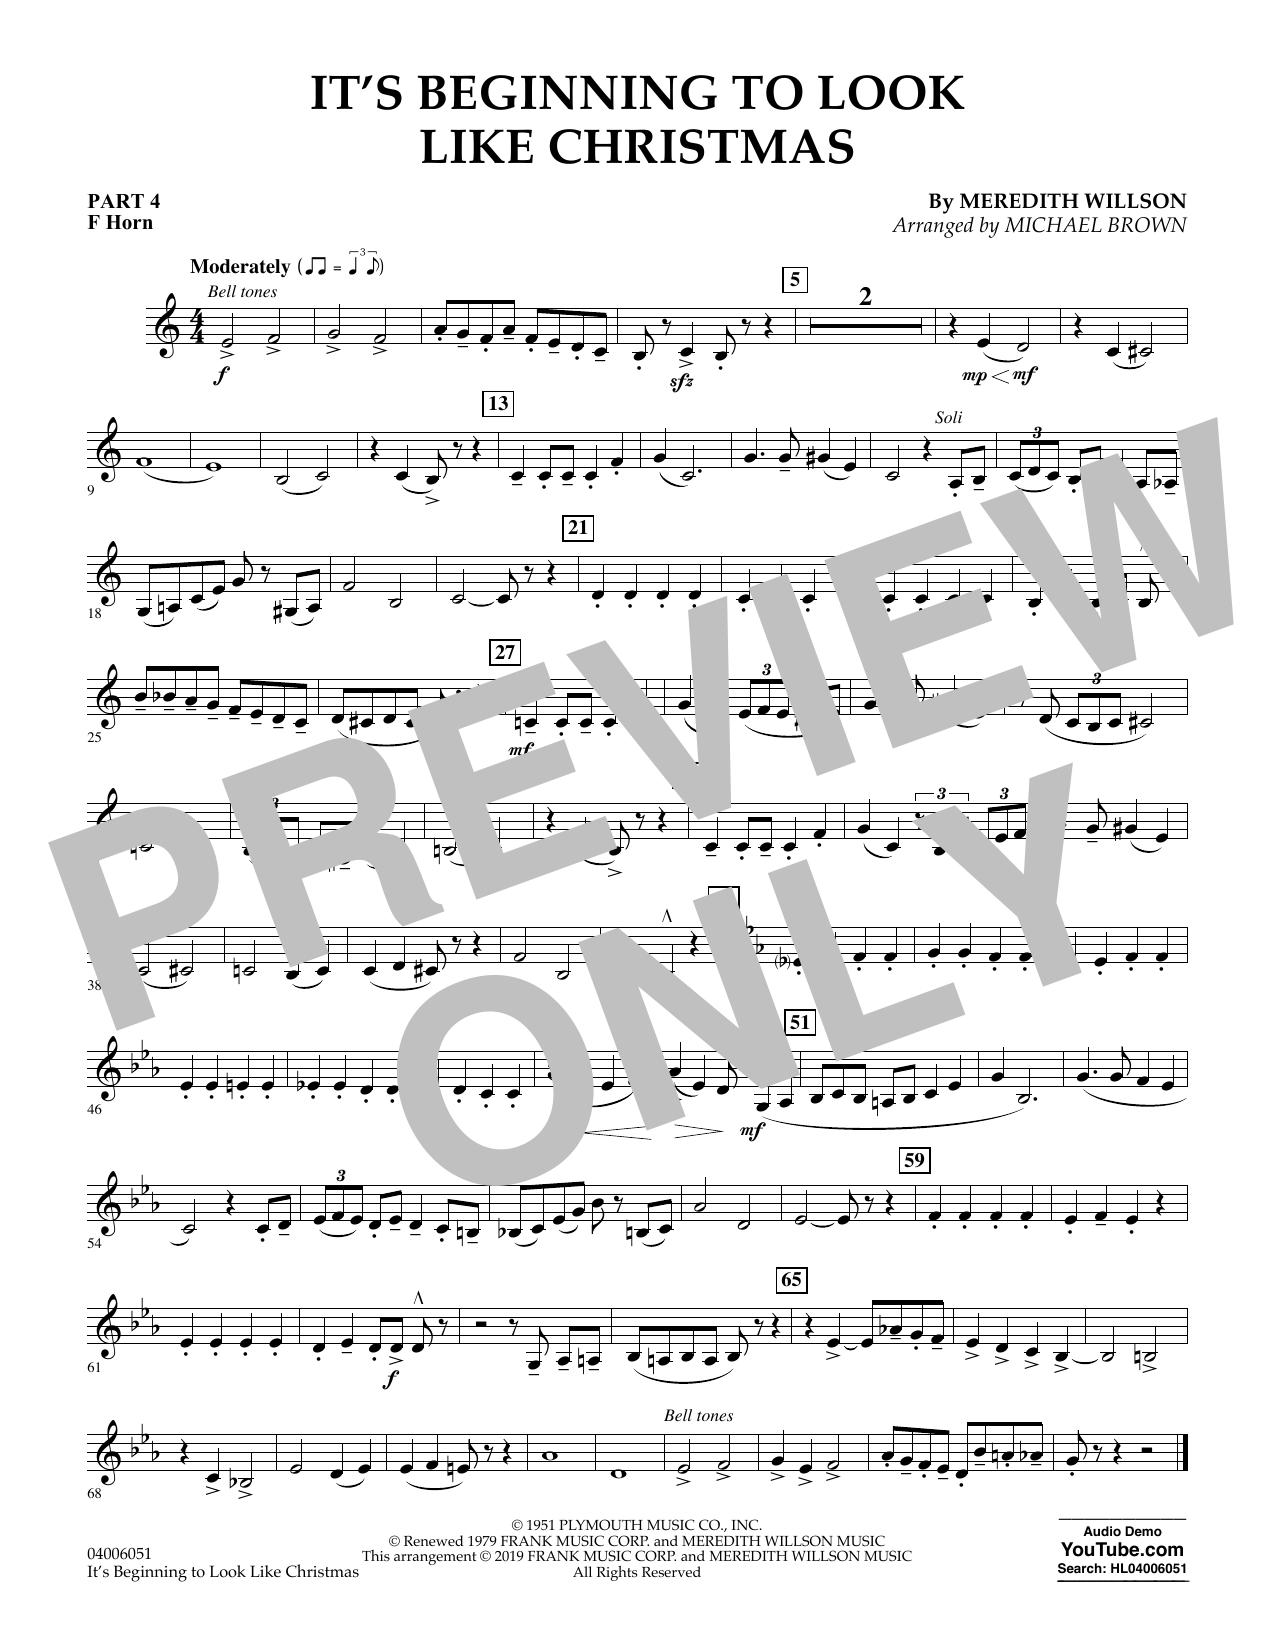 Meredith Willson It's Beginning to Look Like Christmas (arr. Michael Brown) - Pt.4 - F Horn sheet music preview music notes and score for Concert Band including 1 page(s)